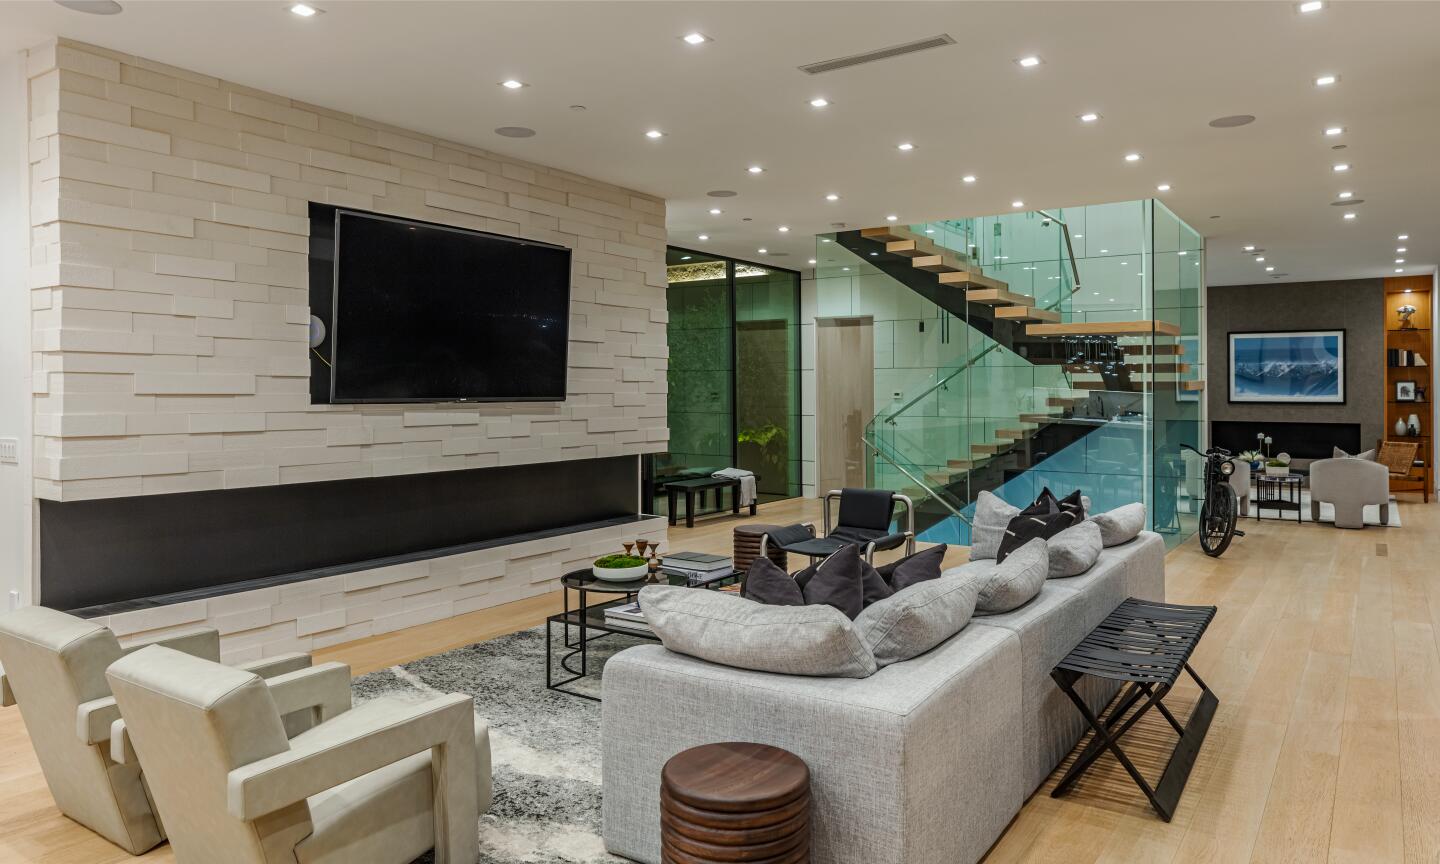 The living room has a built-in TV, furniture, a floating stairway and track lighting.